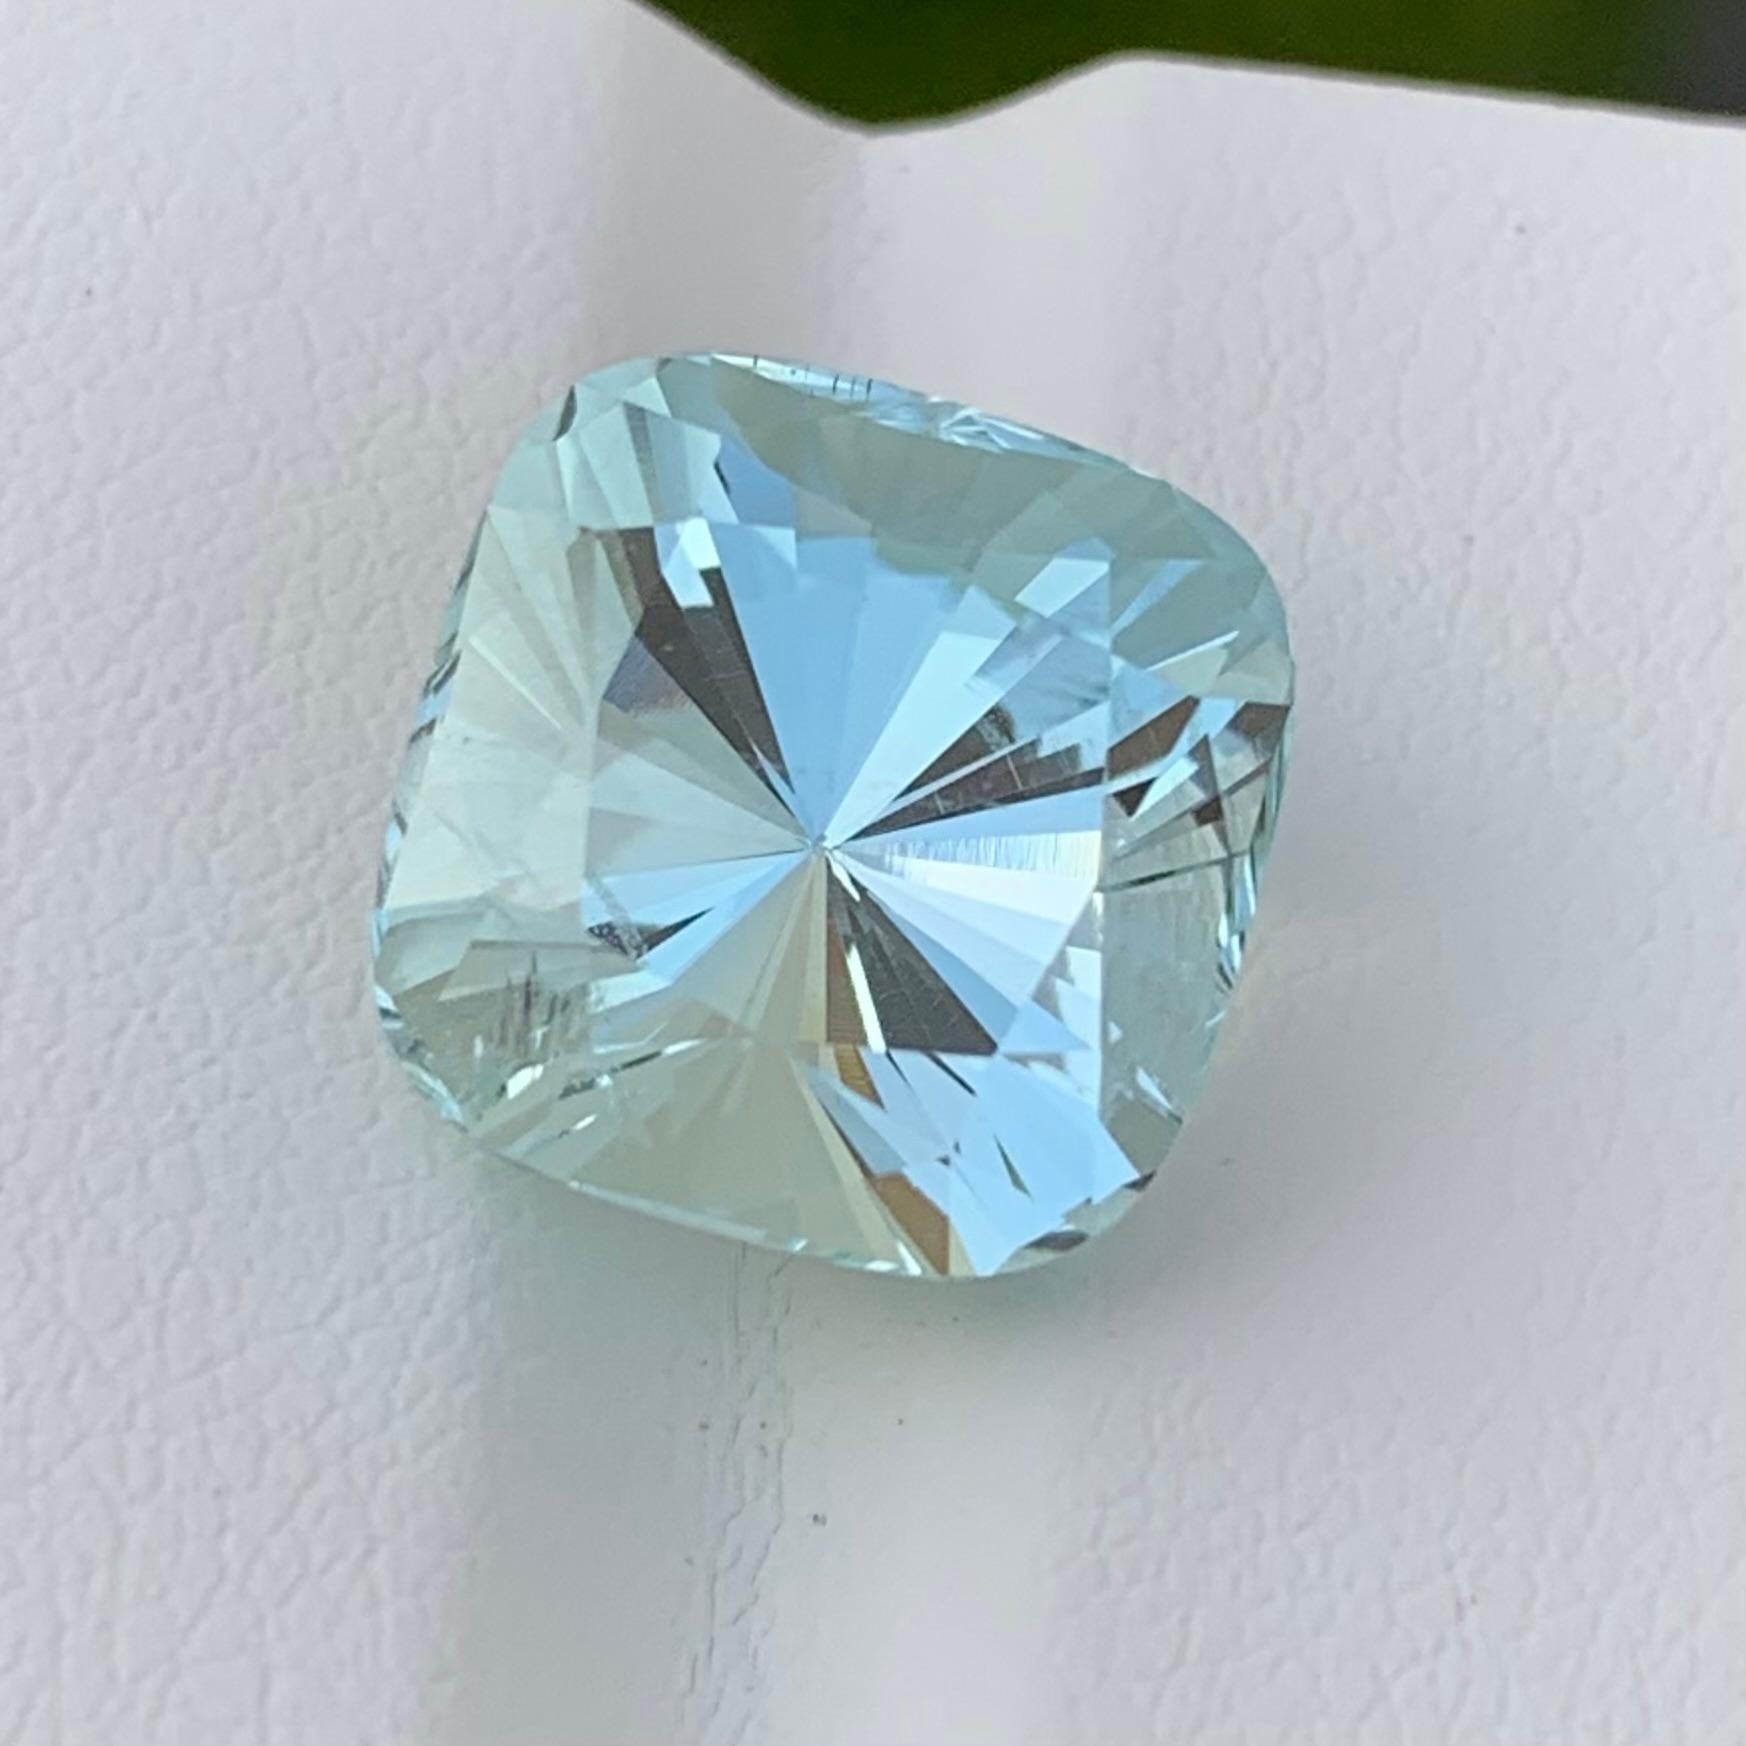 Loose Aquamarine
Weight: 9.20 Carat
Dimension: 12.2 x 12.1 x 10.4 Mm
Colour : Pale Blue
Origin: Shigar Valley, Pakistan
Treatment: Non
Certificate : On Demand
Shape: Square 

Aquamarine is a captivating gemstone known for its enchanting blue-green